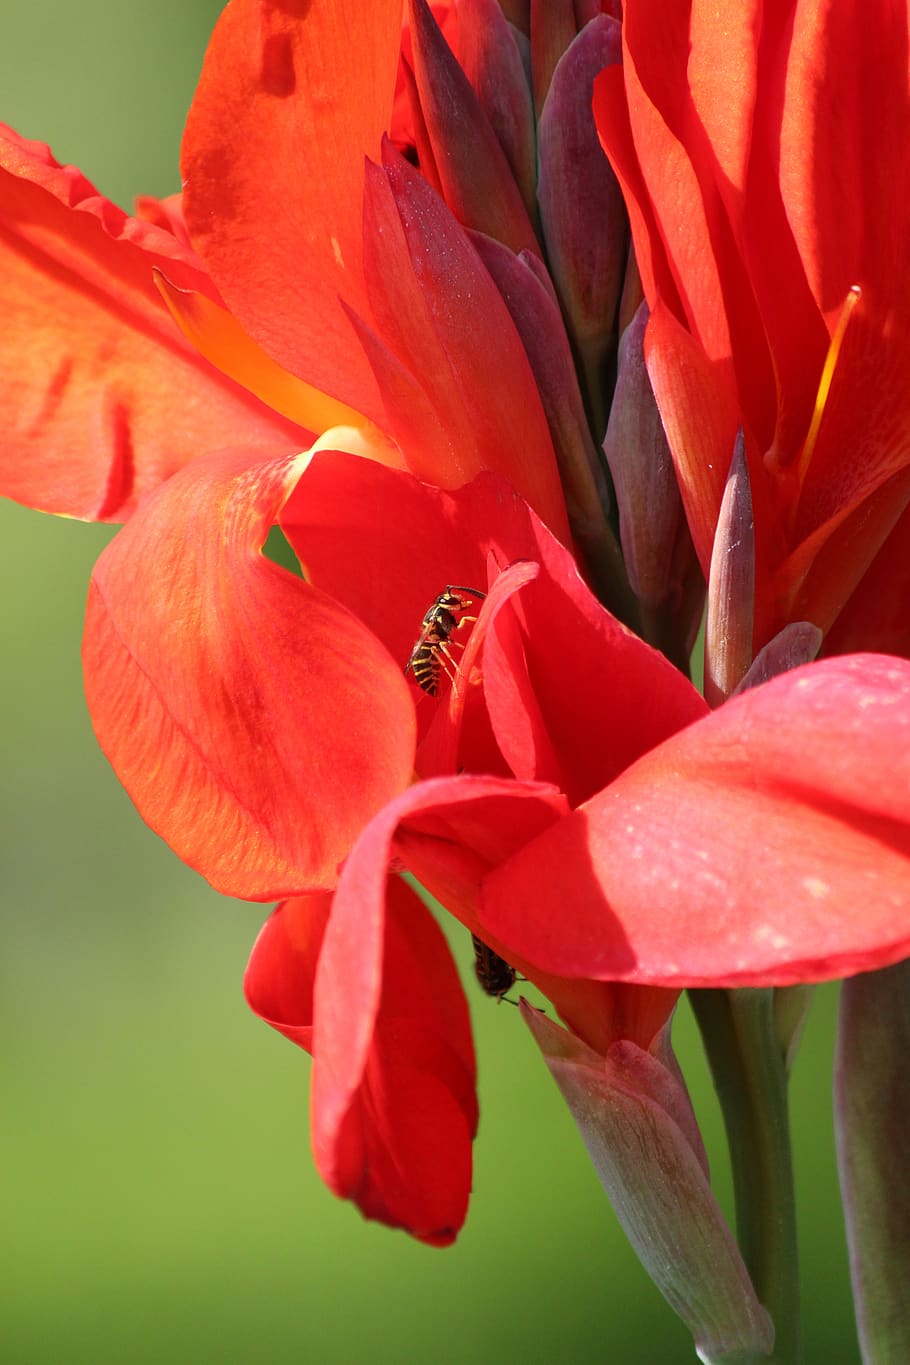 kanna, flower, red flower, canna, red, green, bloom, flora, nature, plant